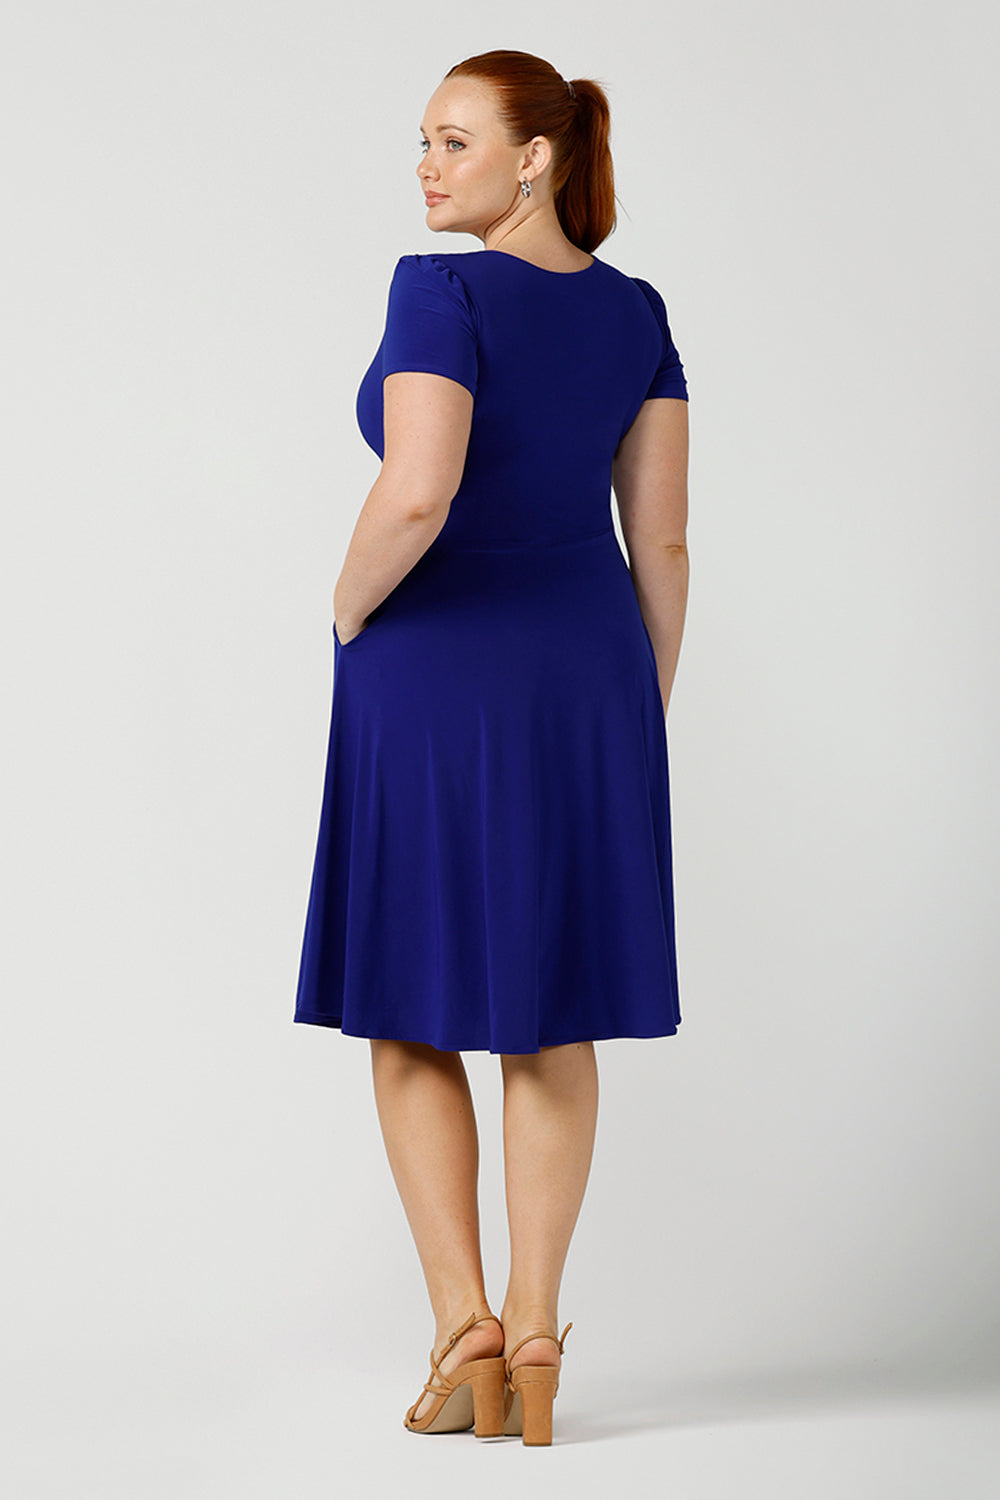 Back view of  A size 12, fuller figure woman wears a jersey dress with short sleeves. In cobalt blue jersey, this dress is a good casual dress for weekend wear capsule wardrobes. Shop Australian-made dresses online is sizes 8 to 24.